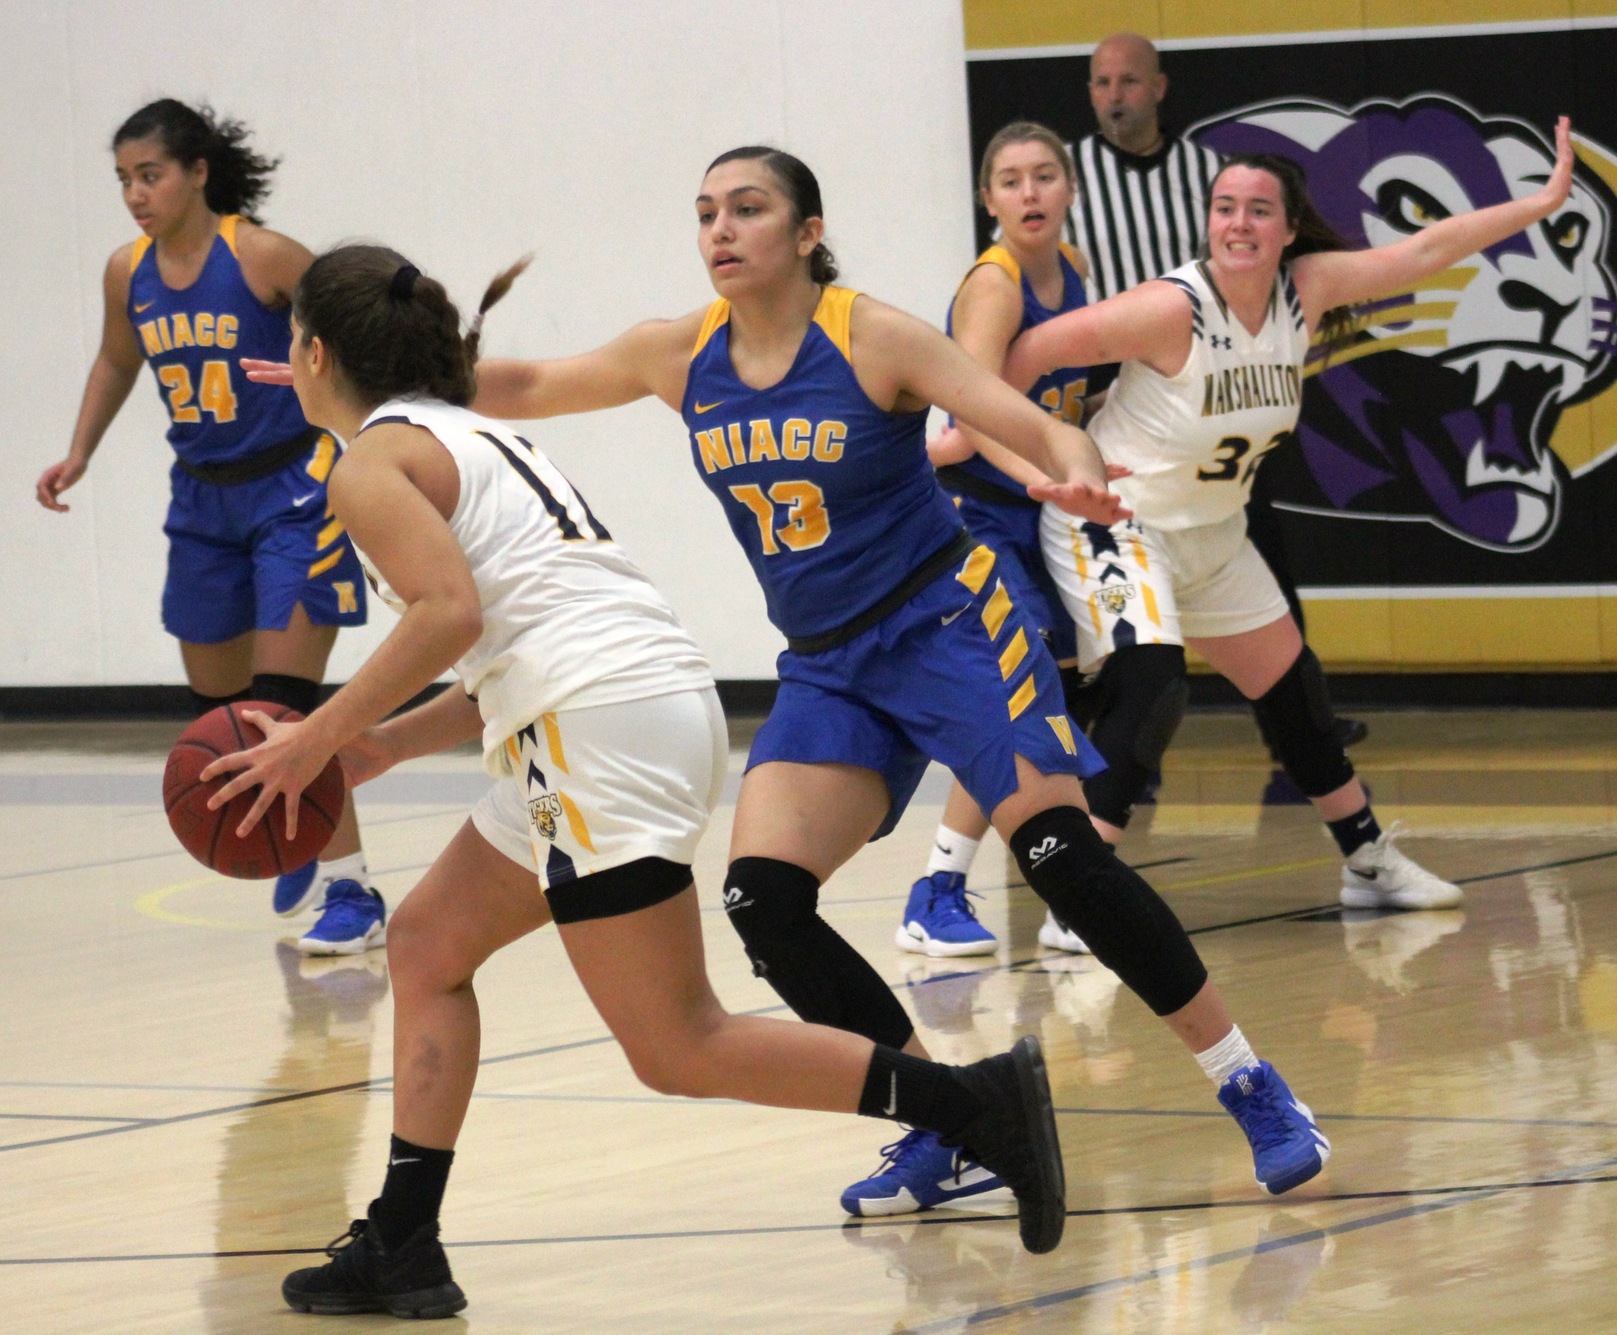 The Lady Trojans play defense against MCC at the Dale Howard Classic earlier this season.